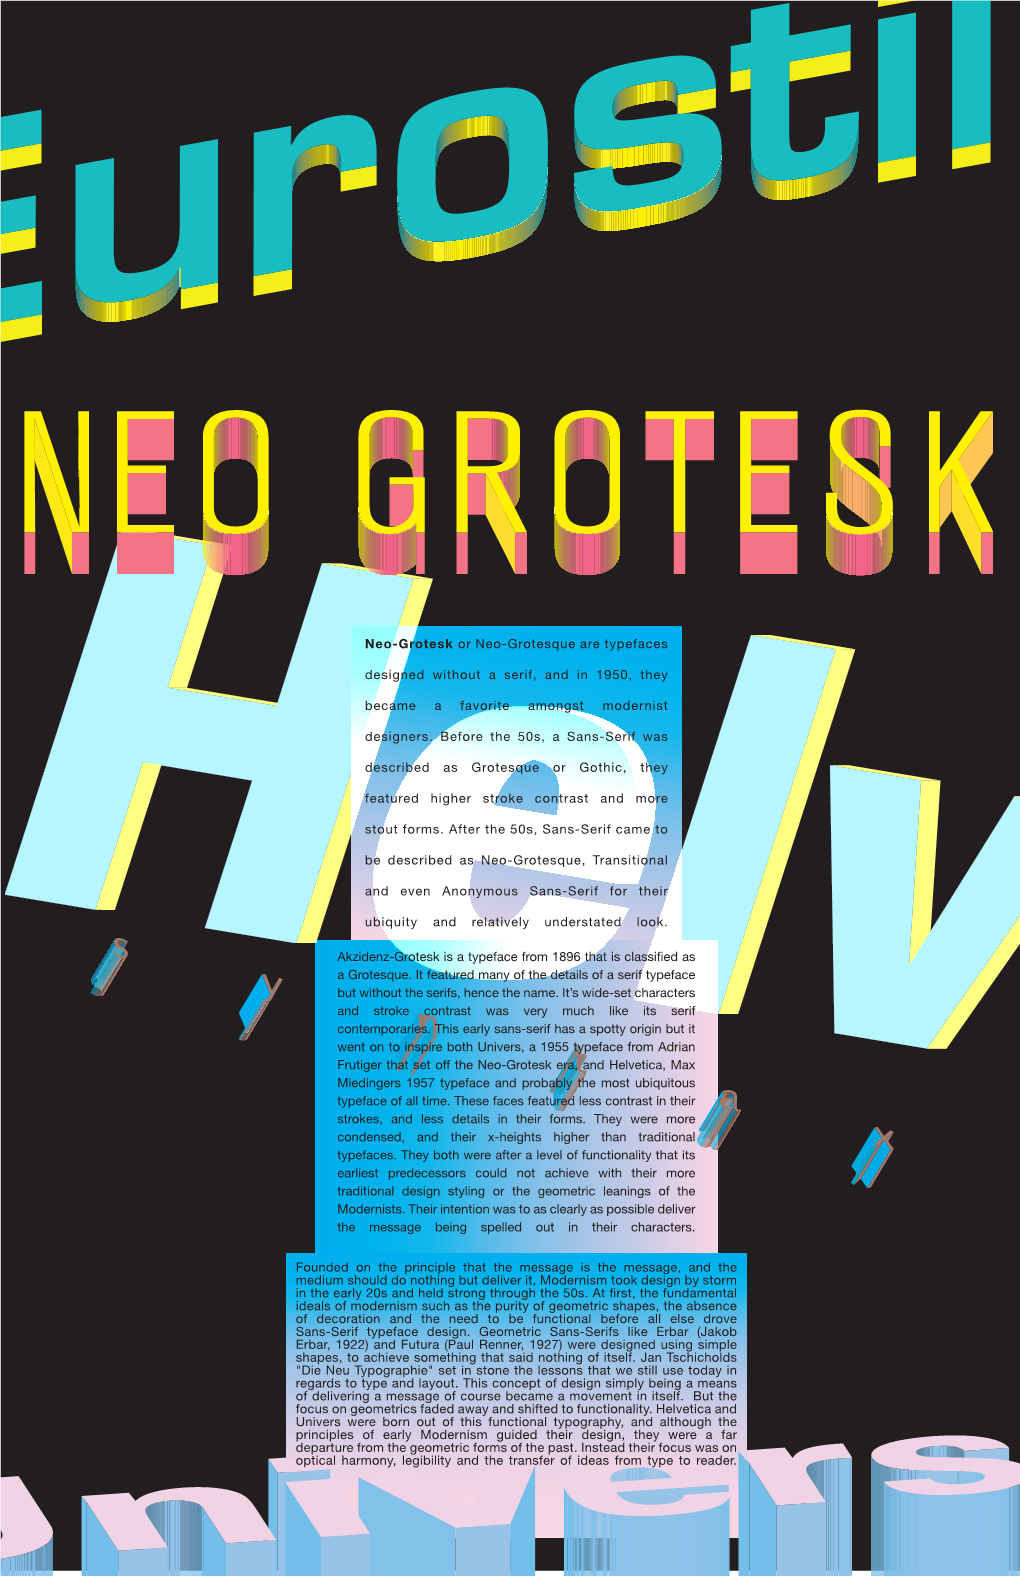 Neo-Grotesk Or Neo-Grotesque Are Typefaces Designed Without a Serif